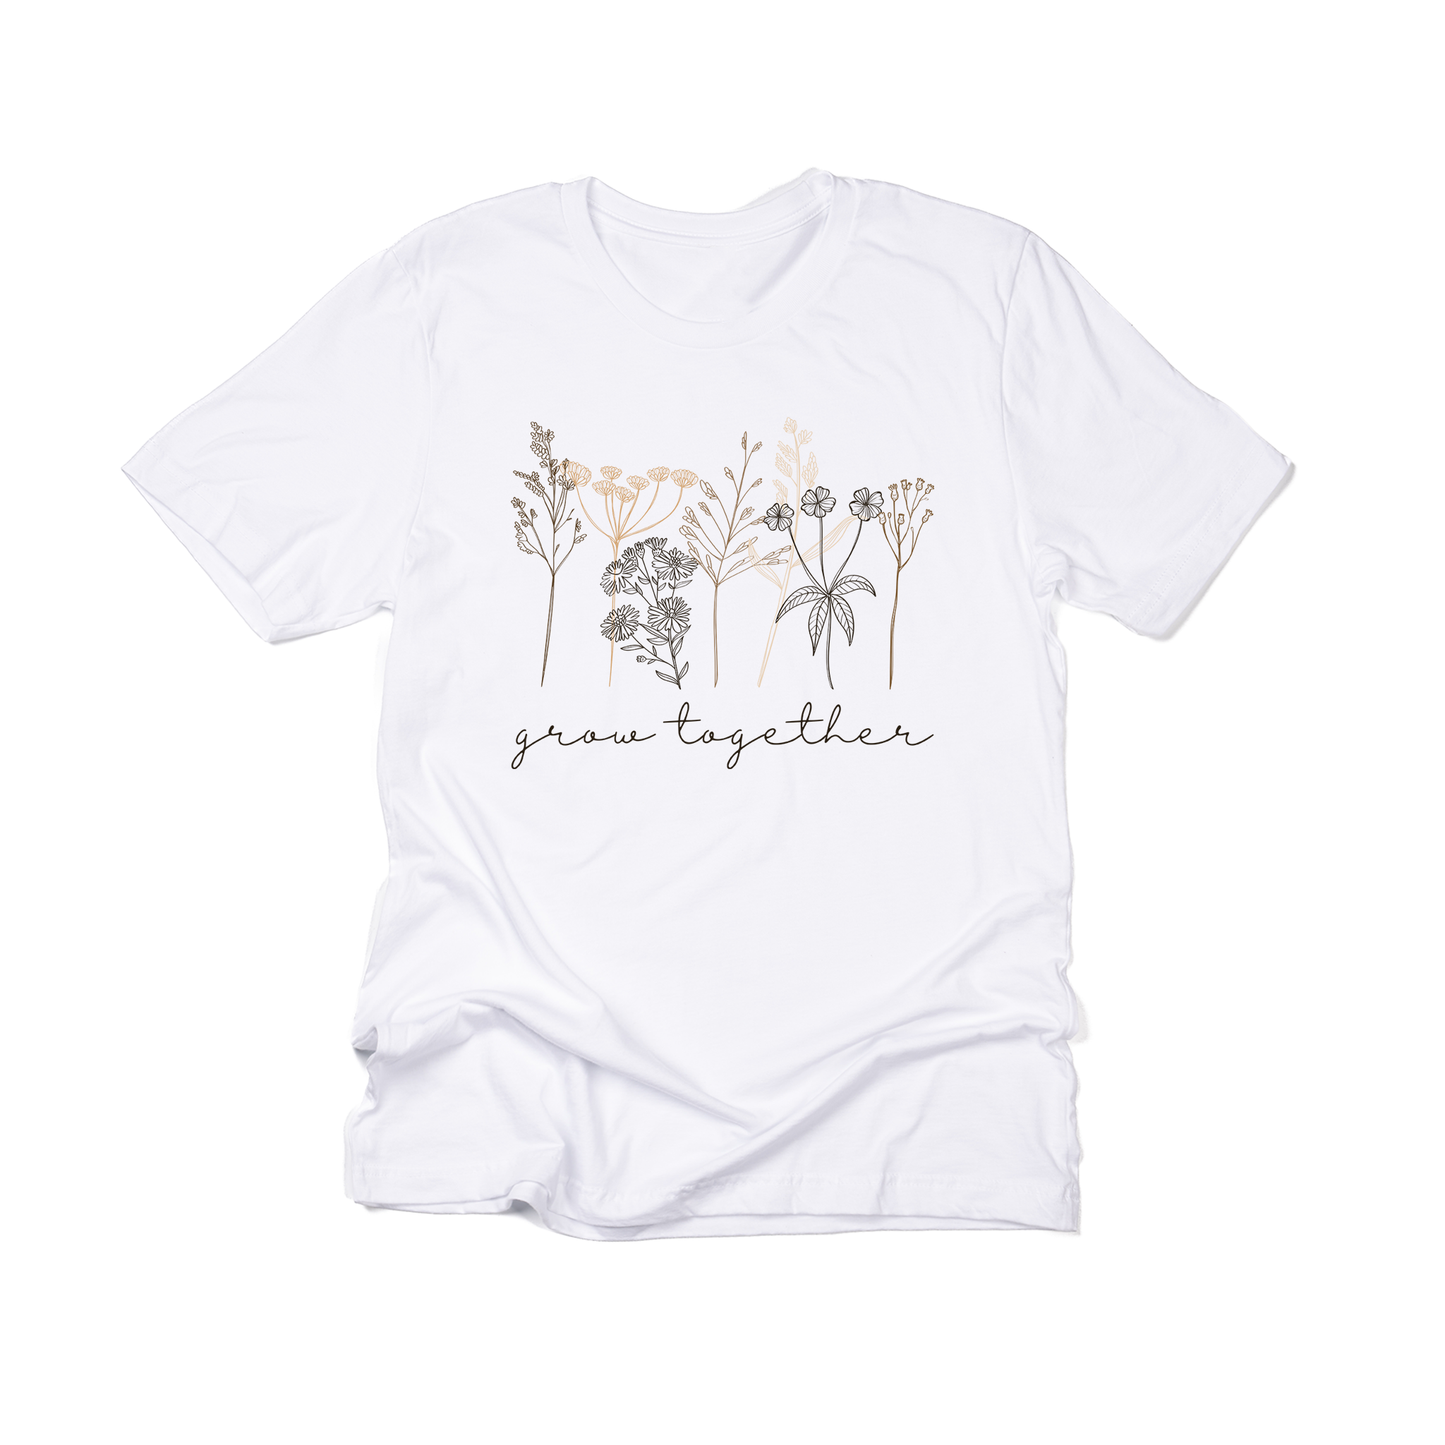 Grow Together *Donation* - Tee (White)